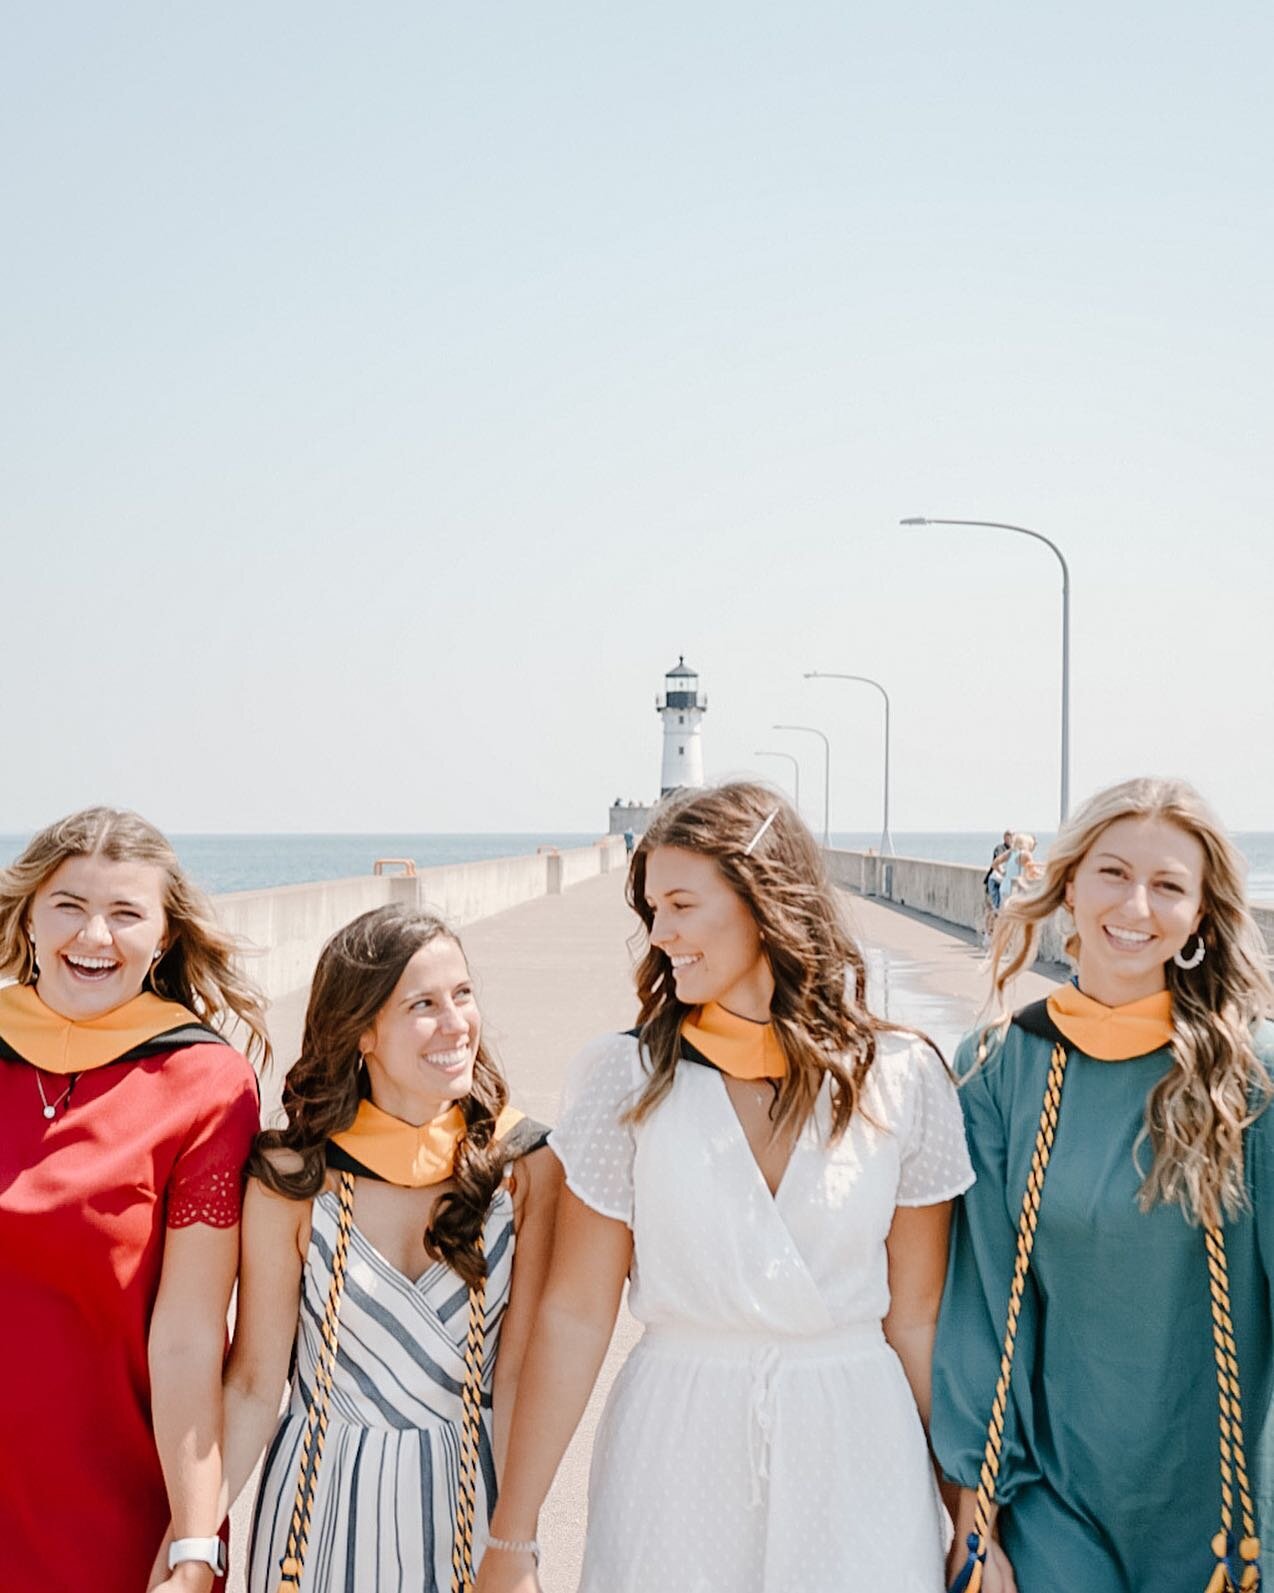 📍 Duluth, MN is filled with so many awesome backdrops - whether it be lighthouses, the famous lift bridge, or the nature just steps outside of the city. 

Congratulations to these 4 on their graduation from St. Scholastica! 👨&zwj;🎓 

DM me to set 